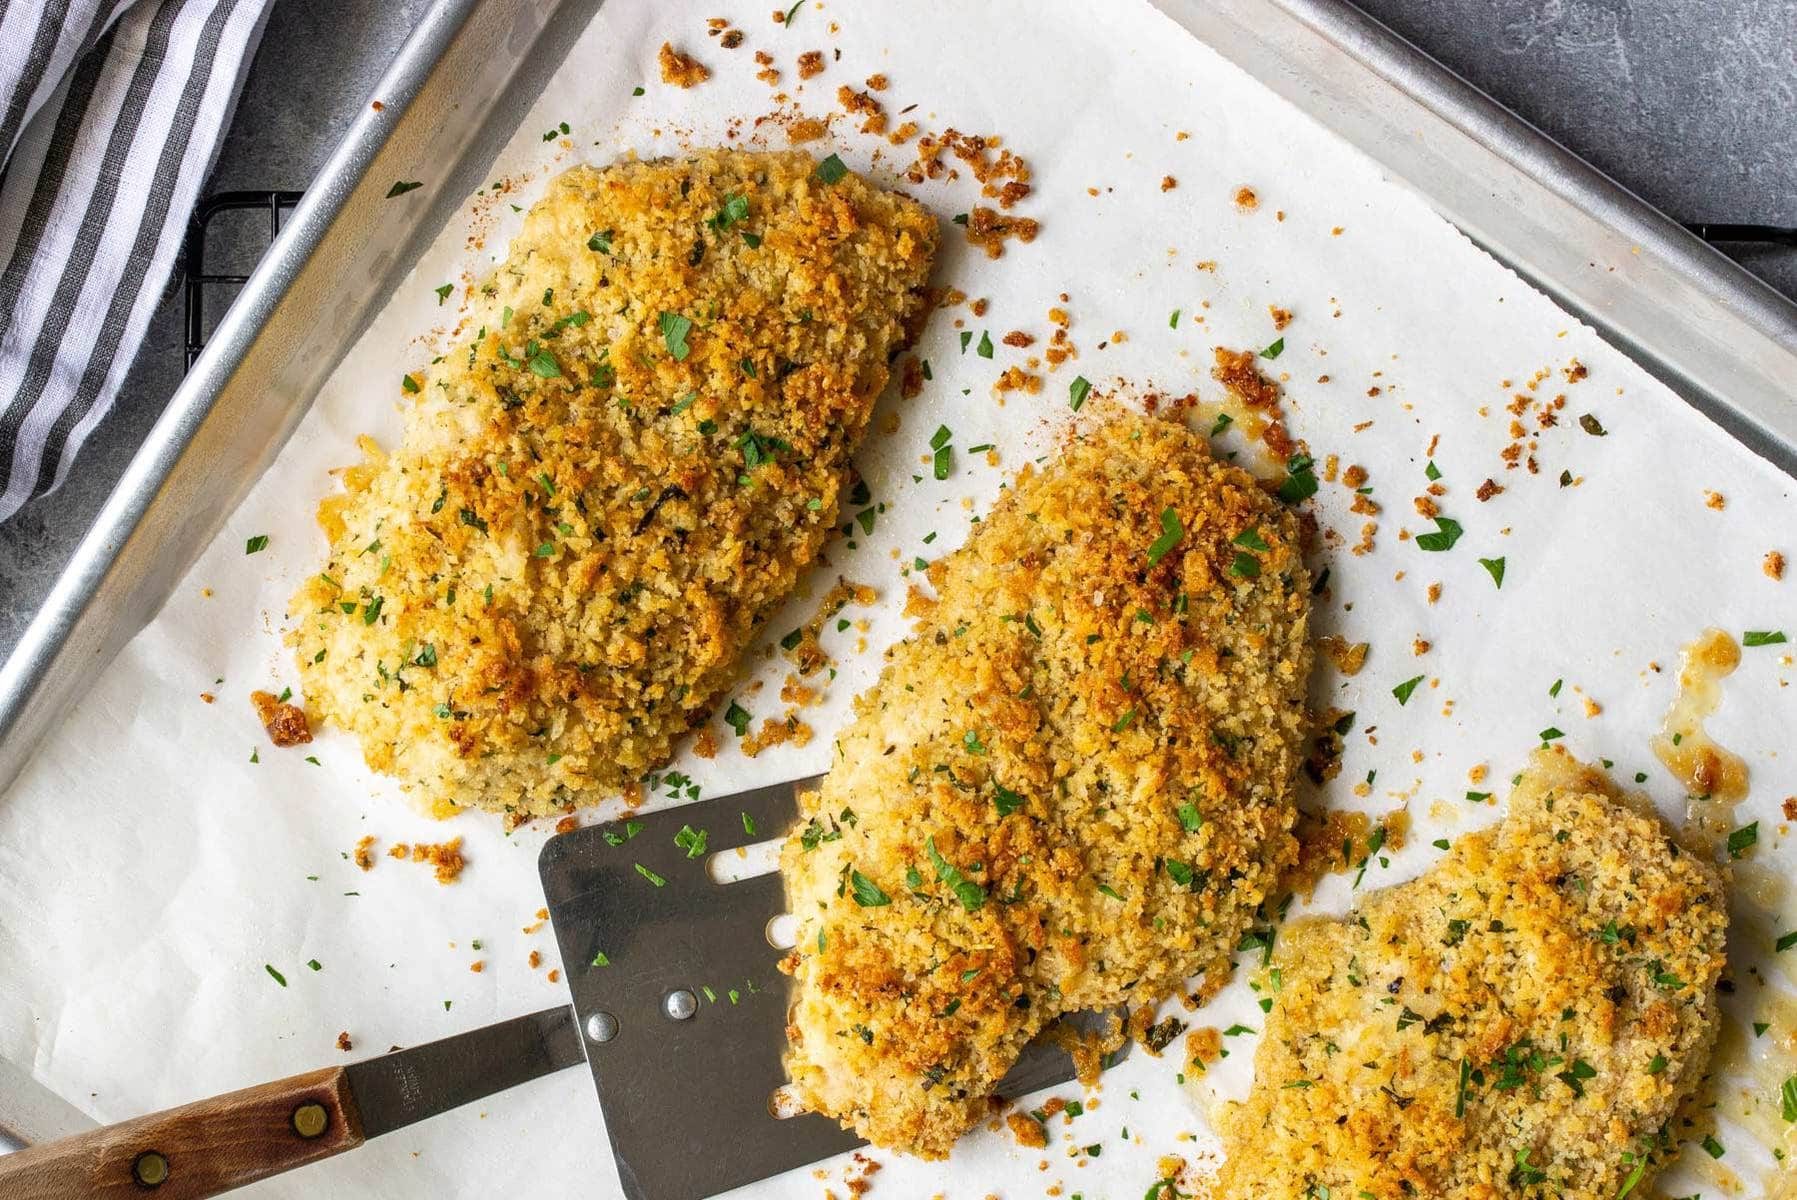 Baked Parmesan Crusted Chicken Recipe Details